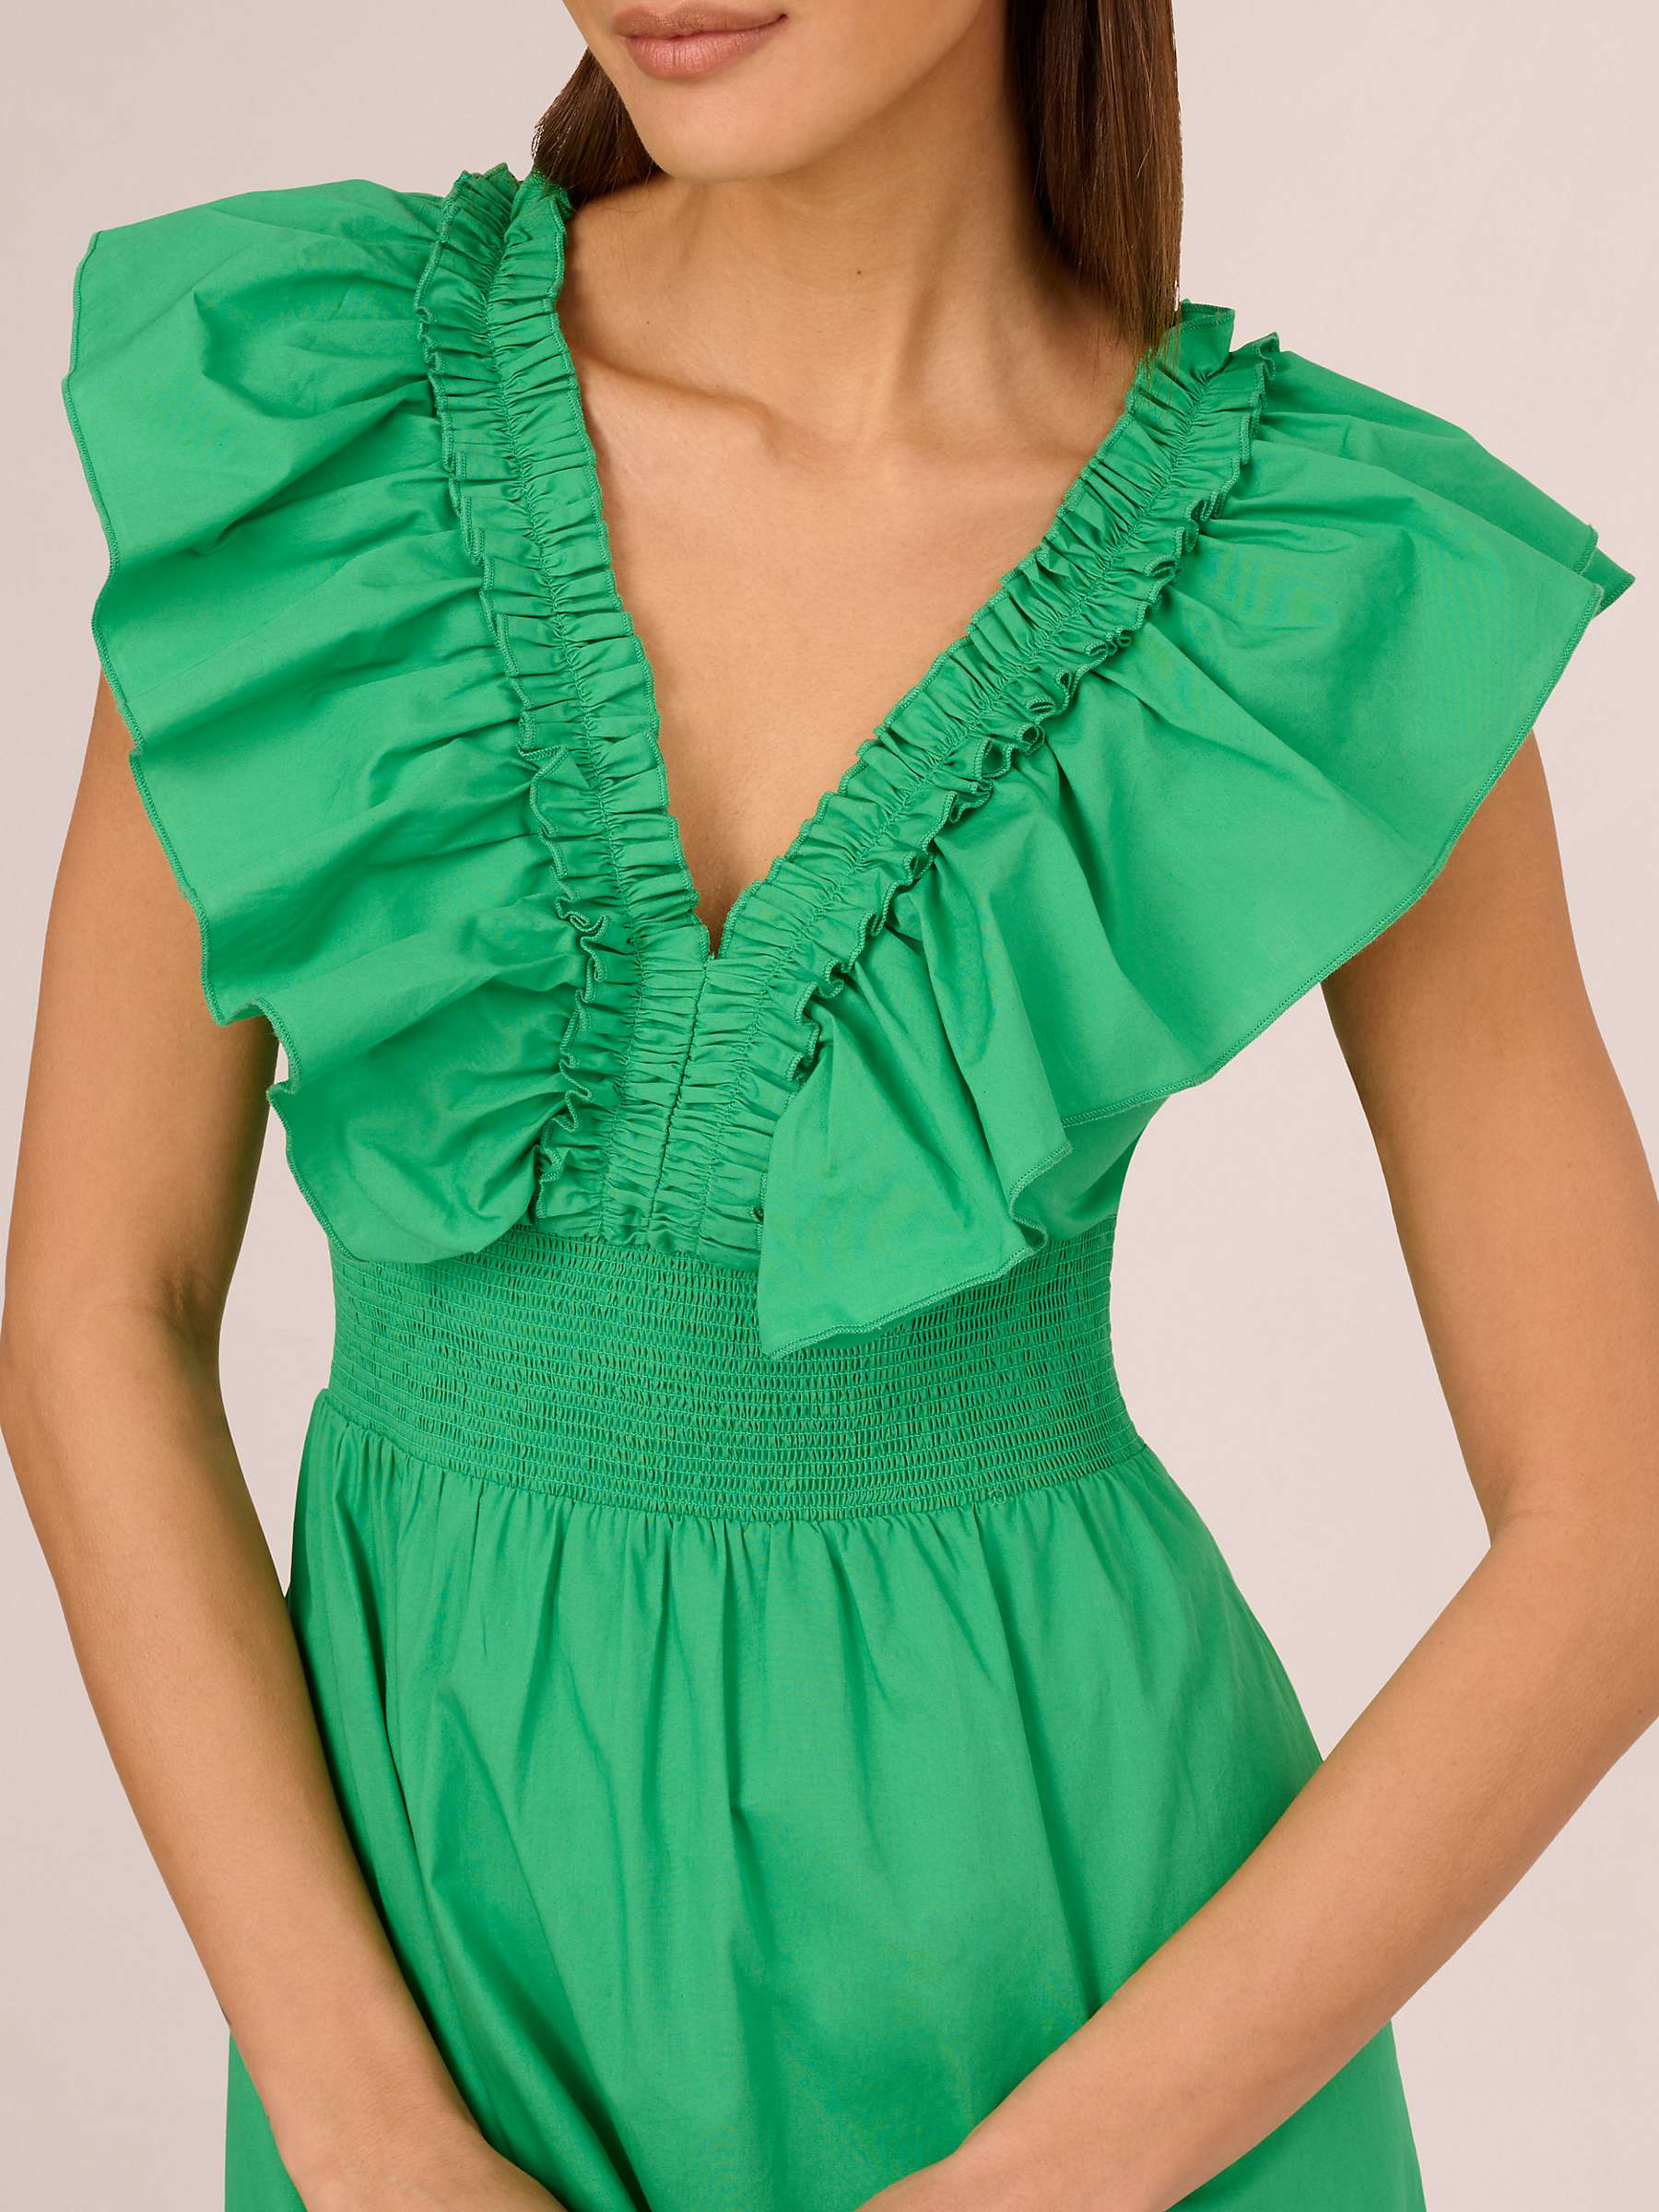 Buy Adrianna by Adrianna Papell Ruffle Front Tiered Maxi Dress, Green Online at johnlewis.com